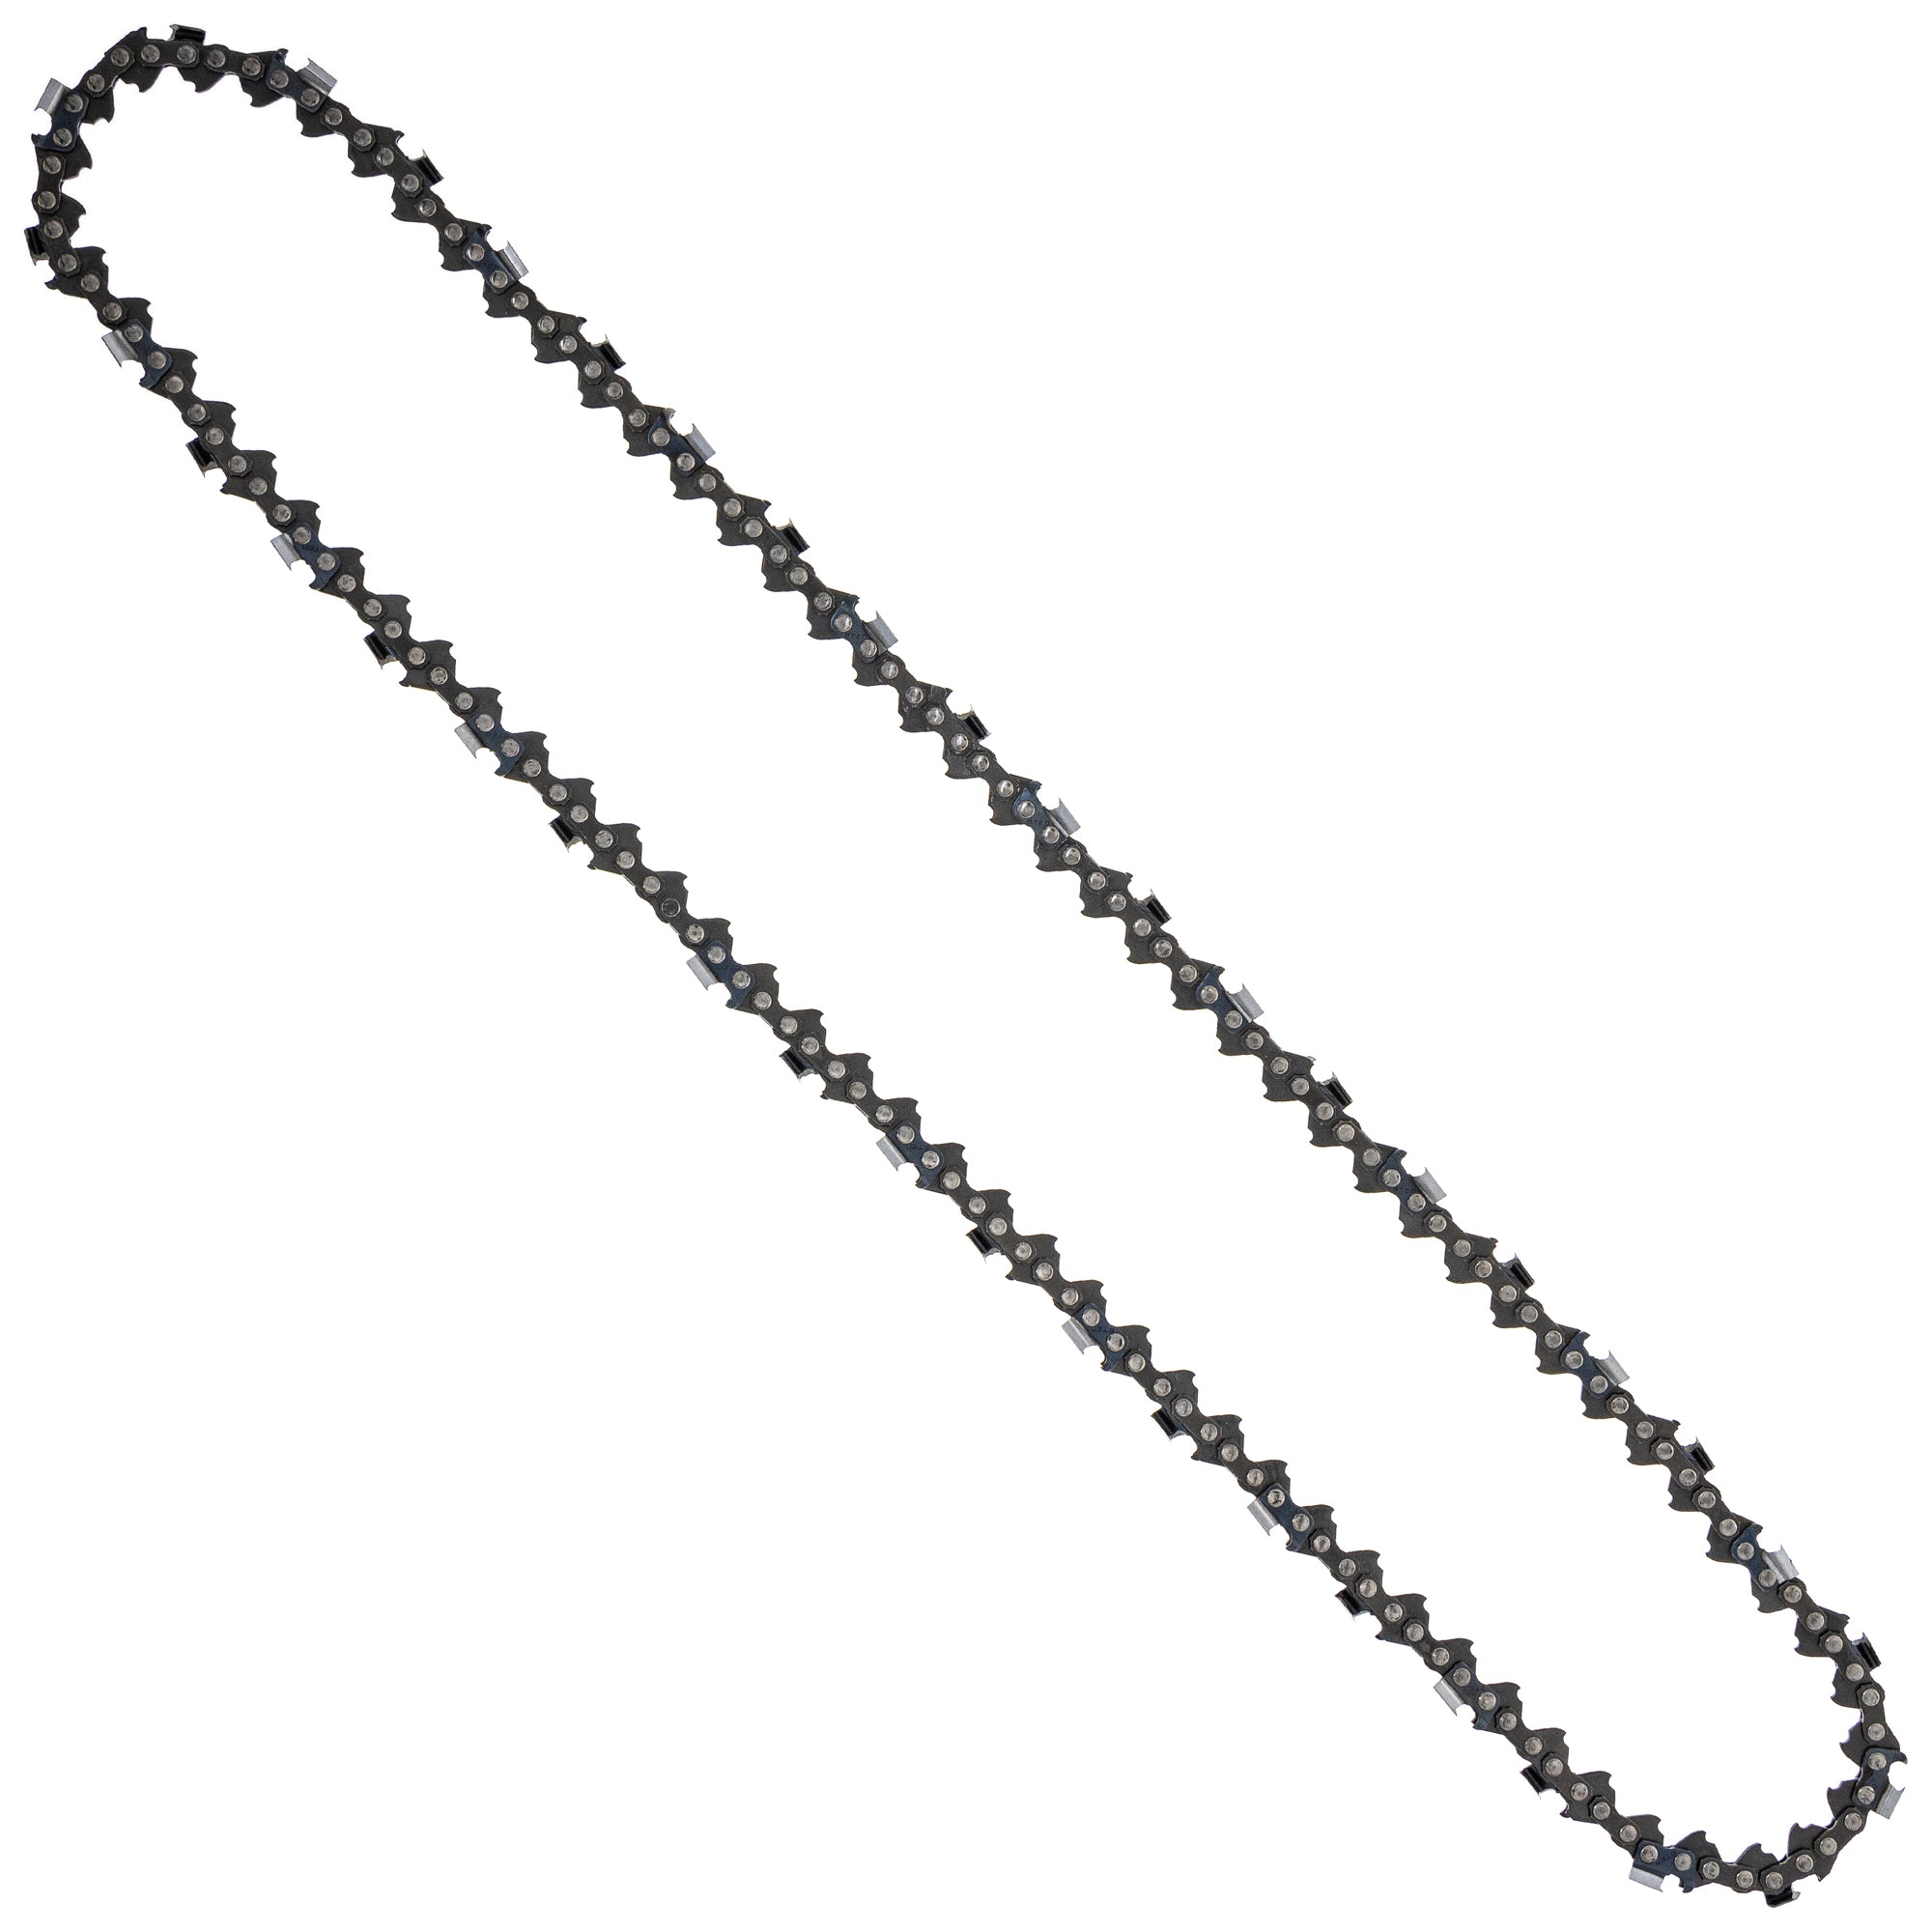 8TEN 810-CCC2279H Chain 2-Pack for zOTHER Stens Oregon MS 634 40 36